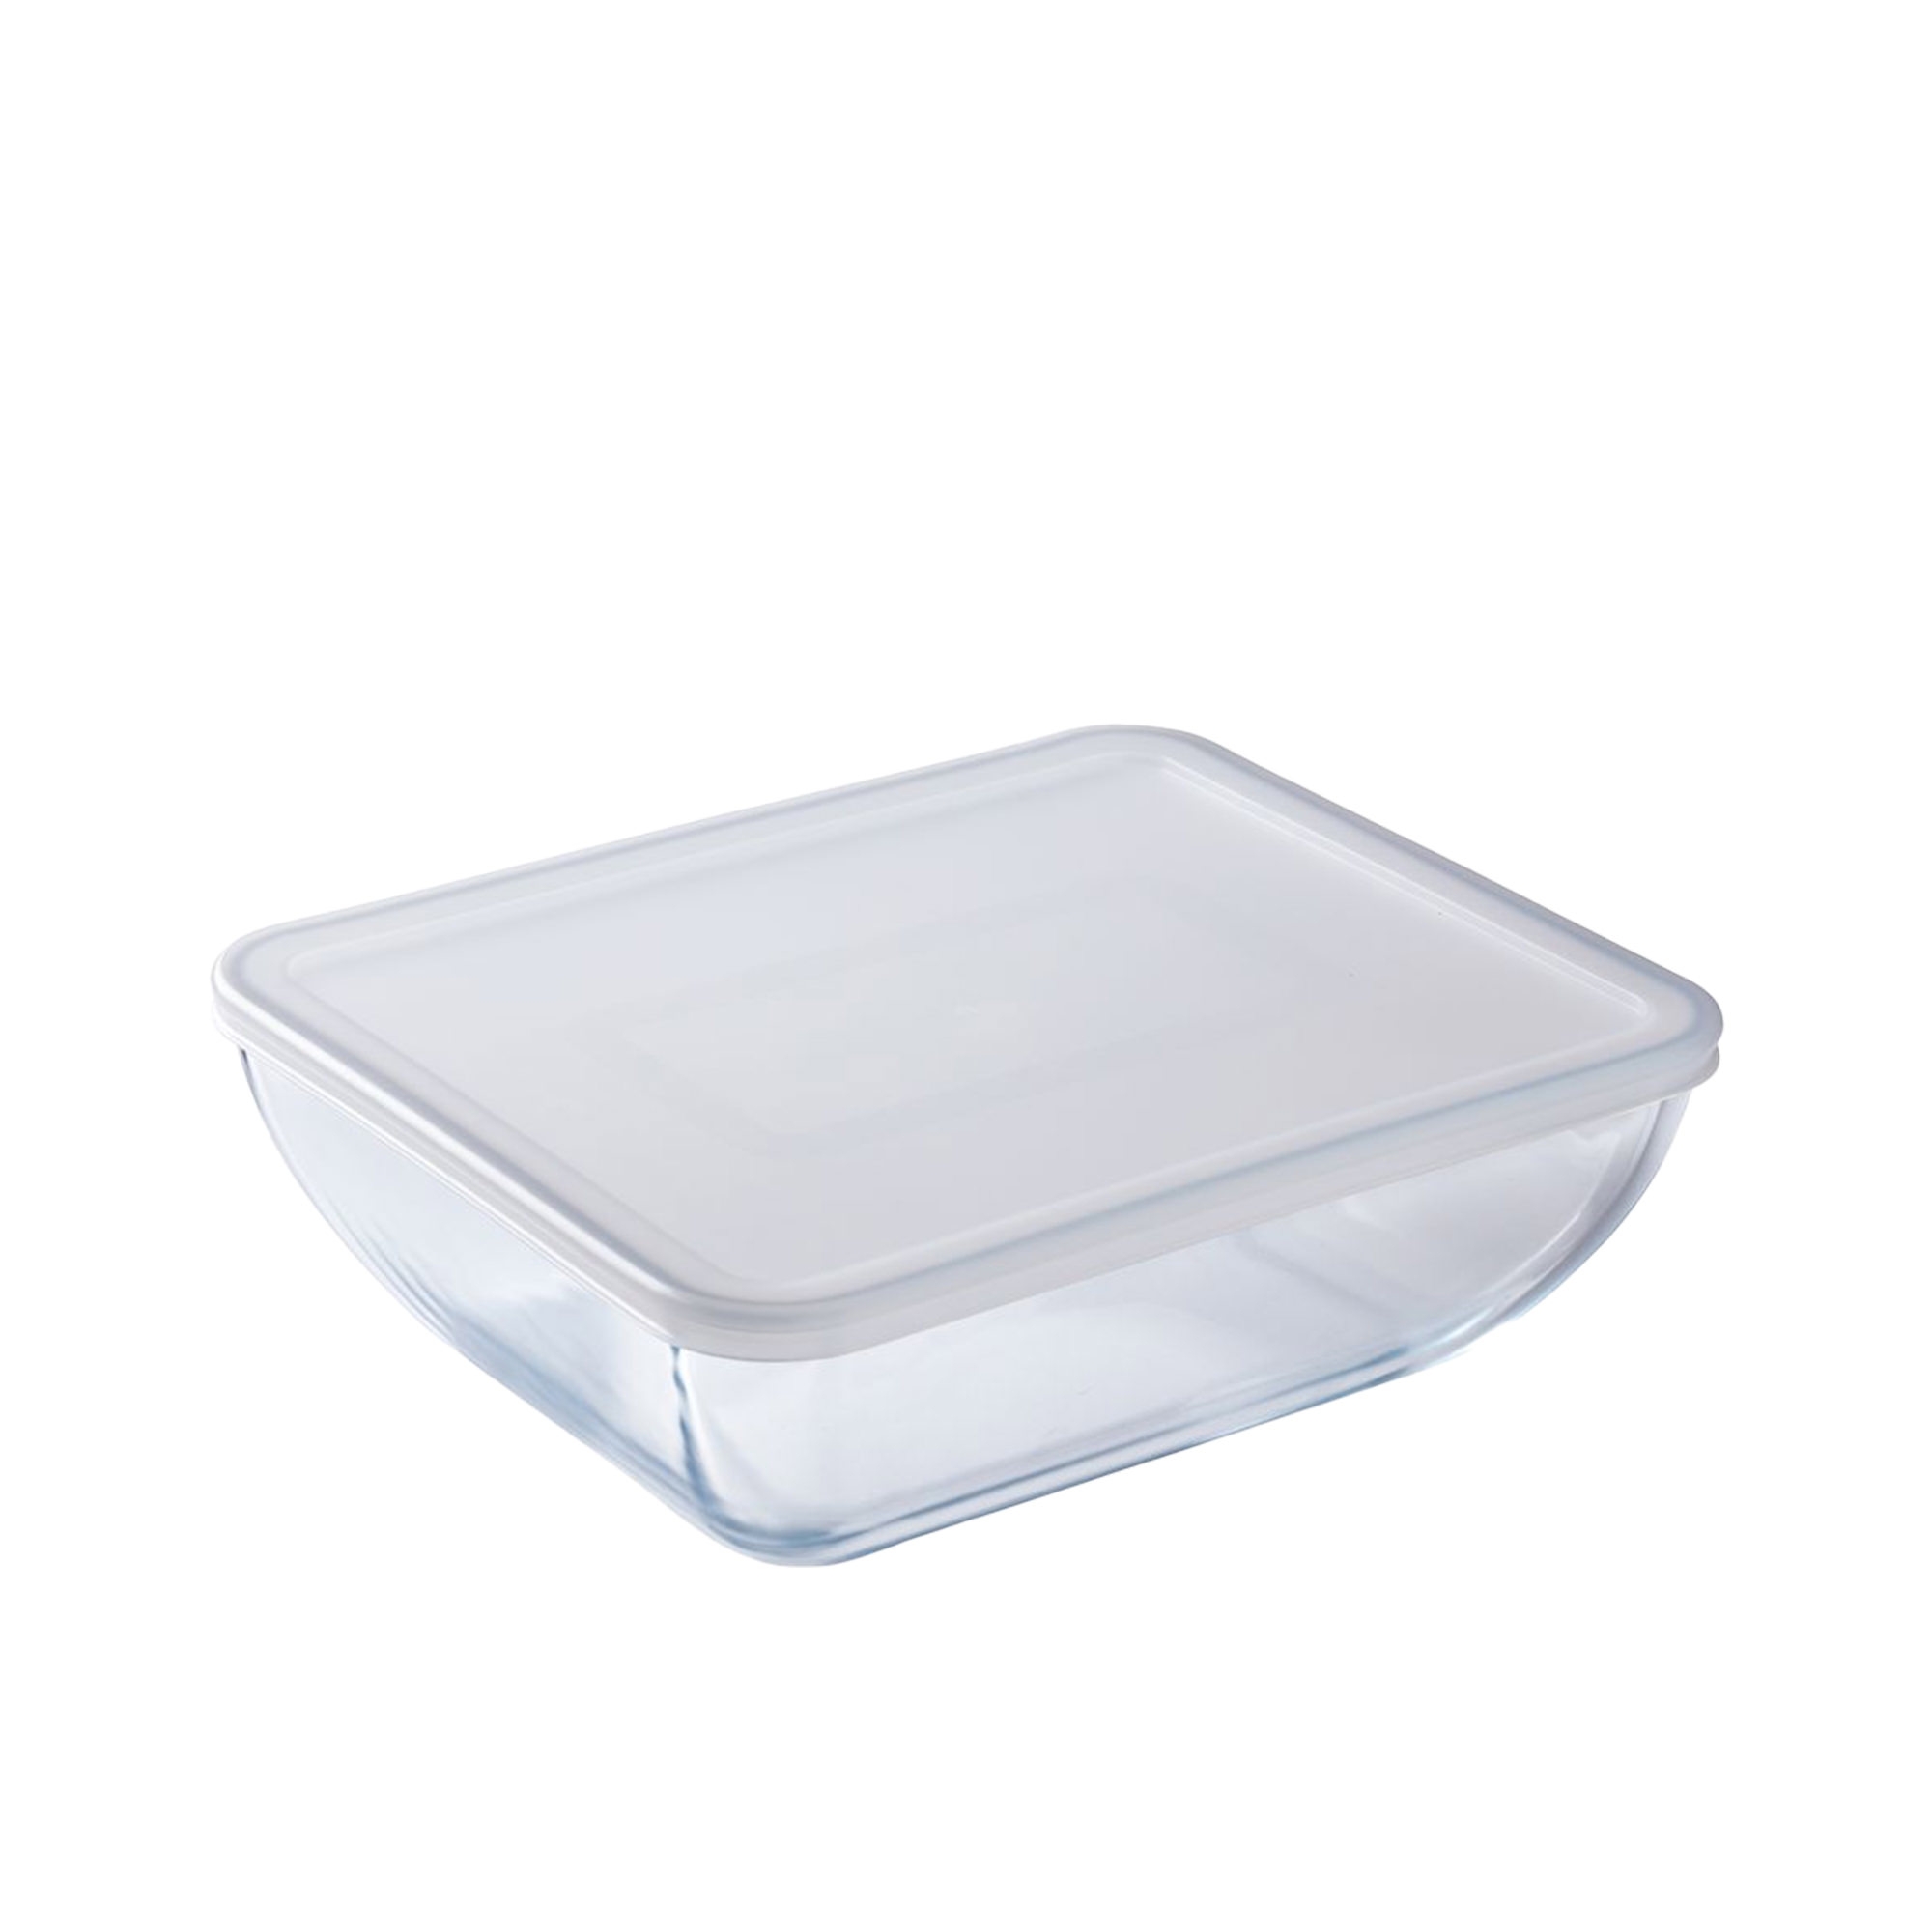 O' Cuisine Rectangular Glass Food Storage Container 2.25L Image 1